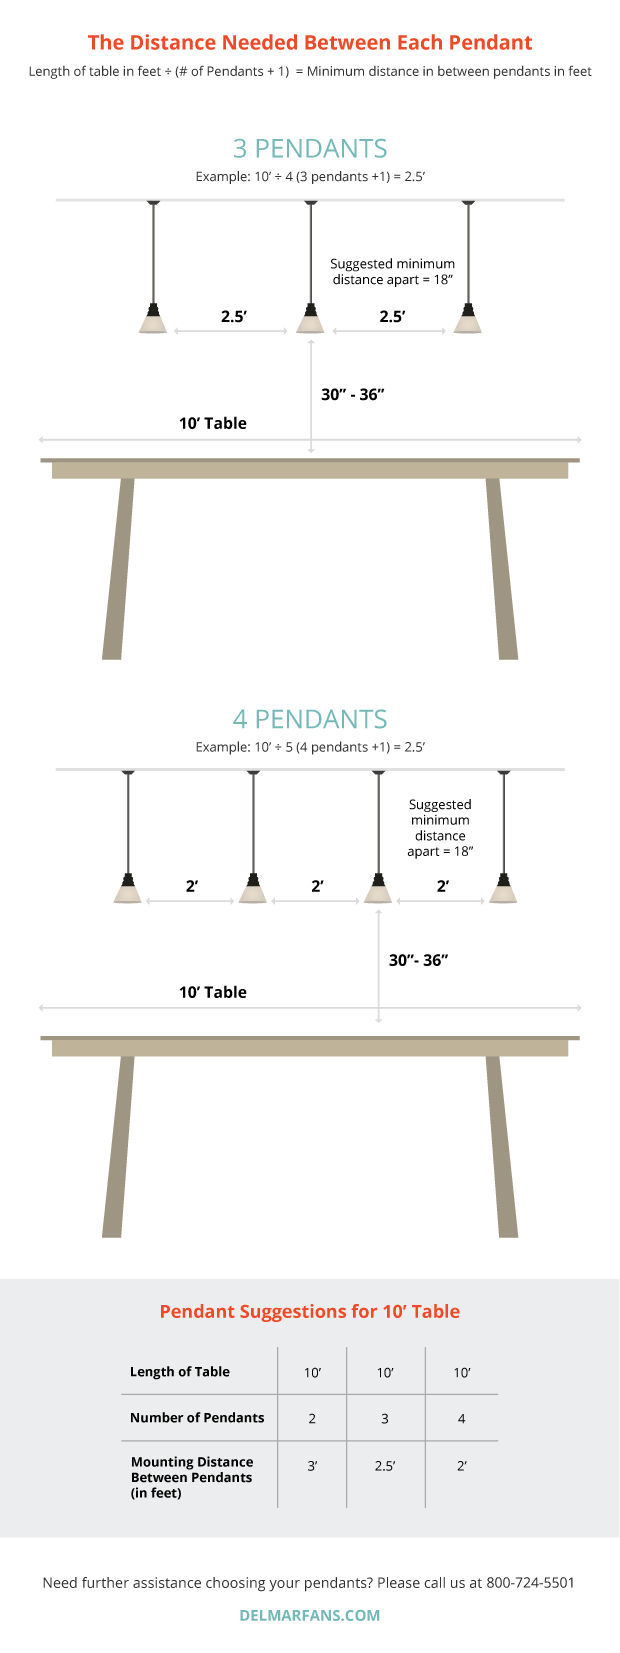 The Distance Needed Between Each Pendant infographic